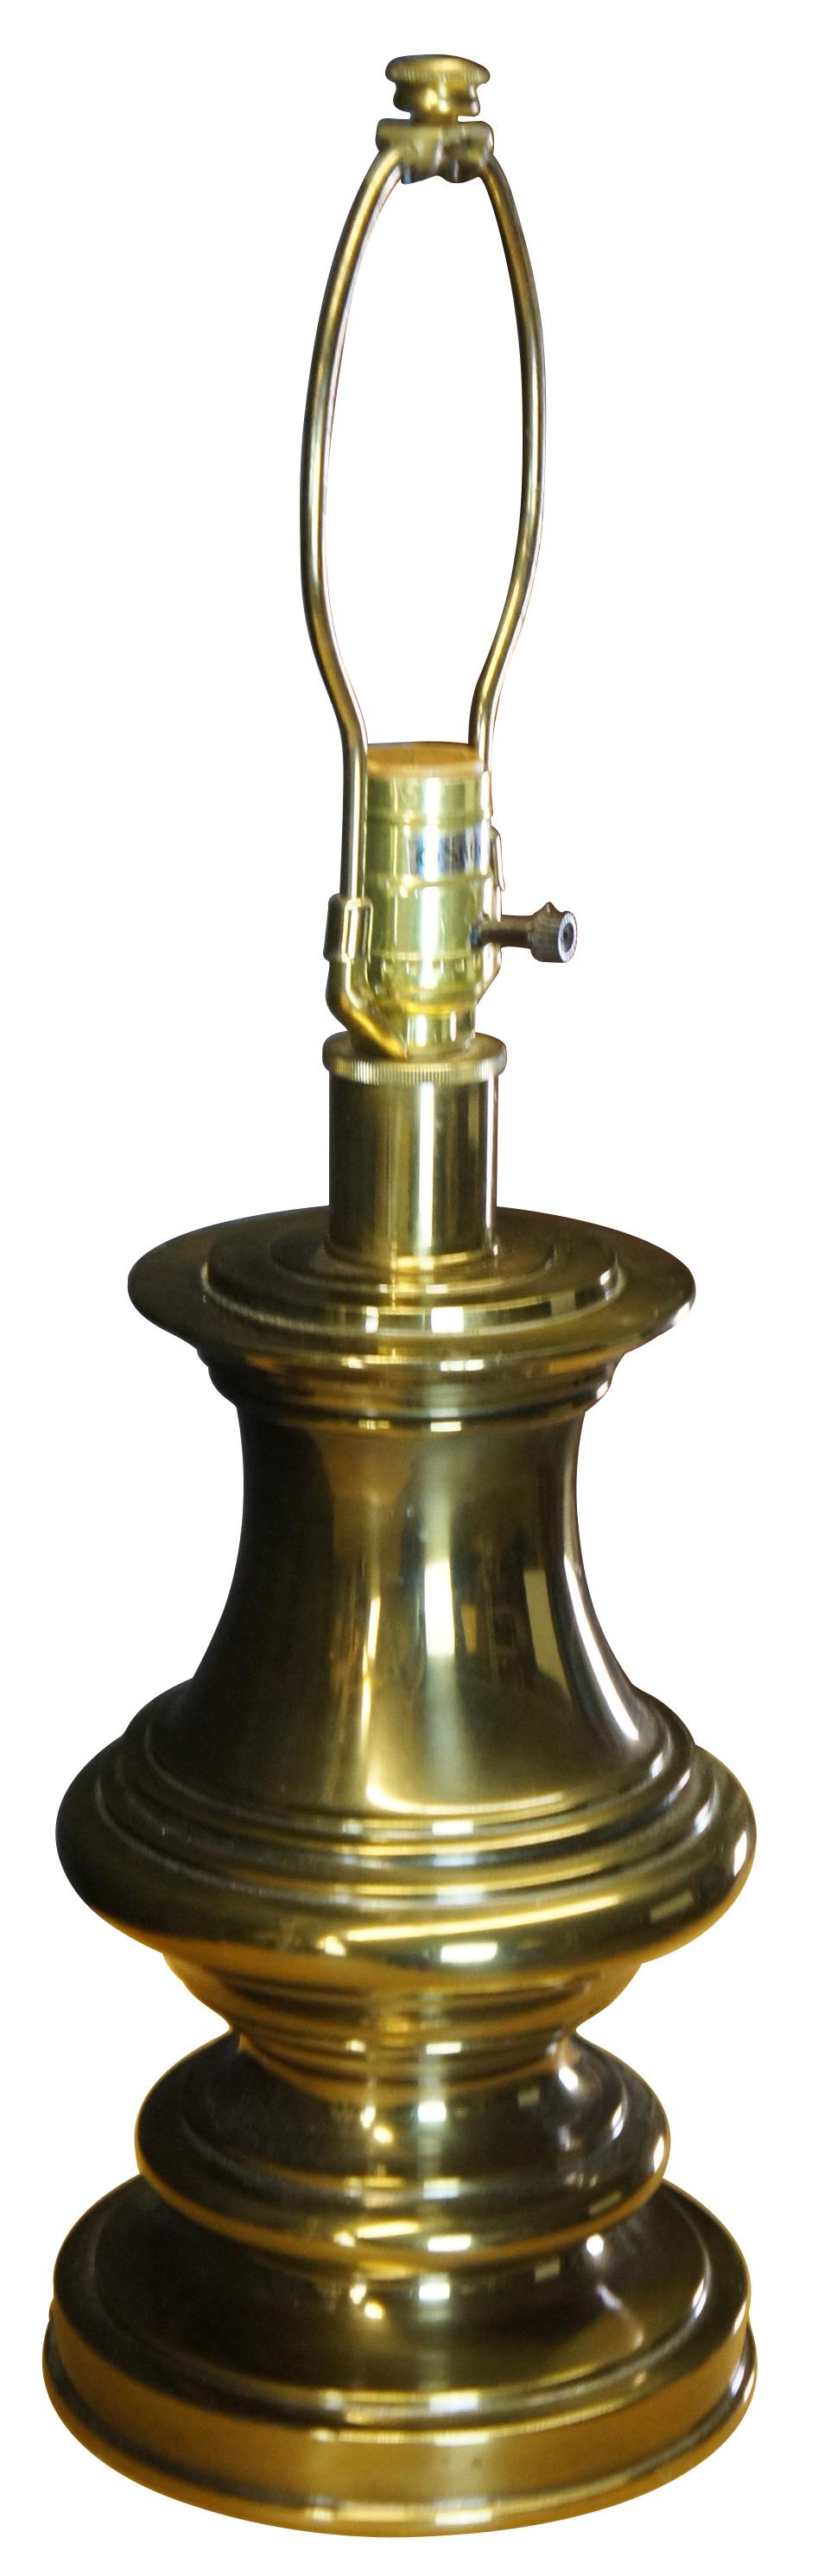 Vintage Stiffel Hollywood Regency style table lamp. Made of heavy brass featuring a trophy or urn form. Size: 22